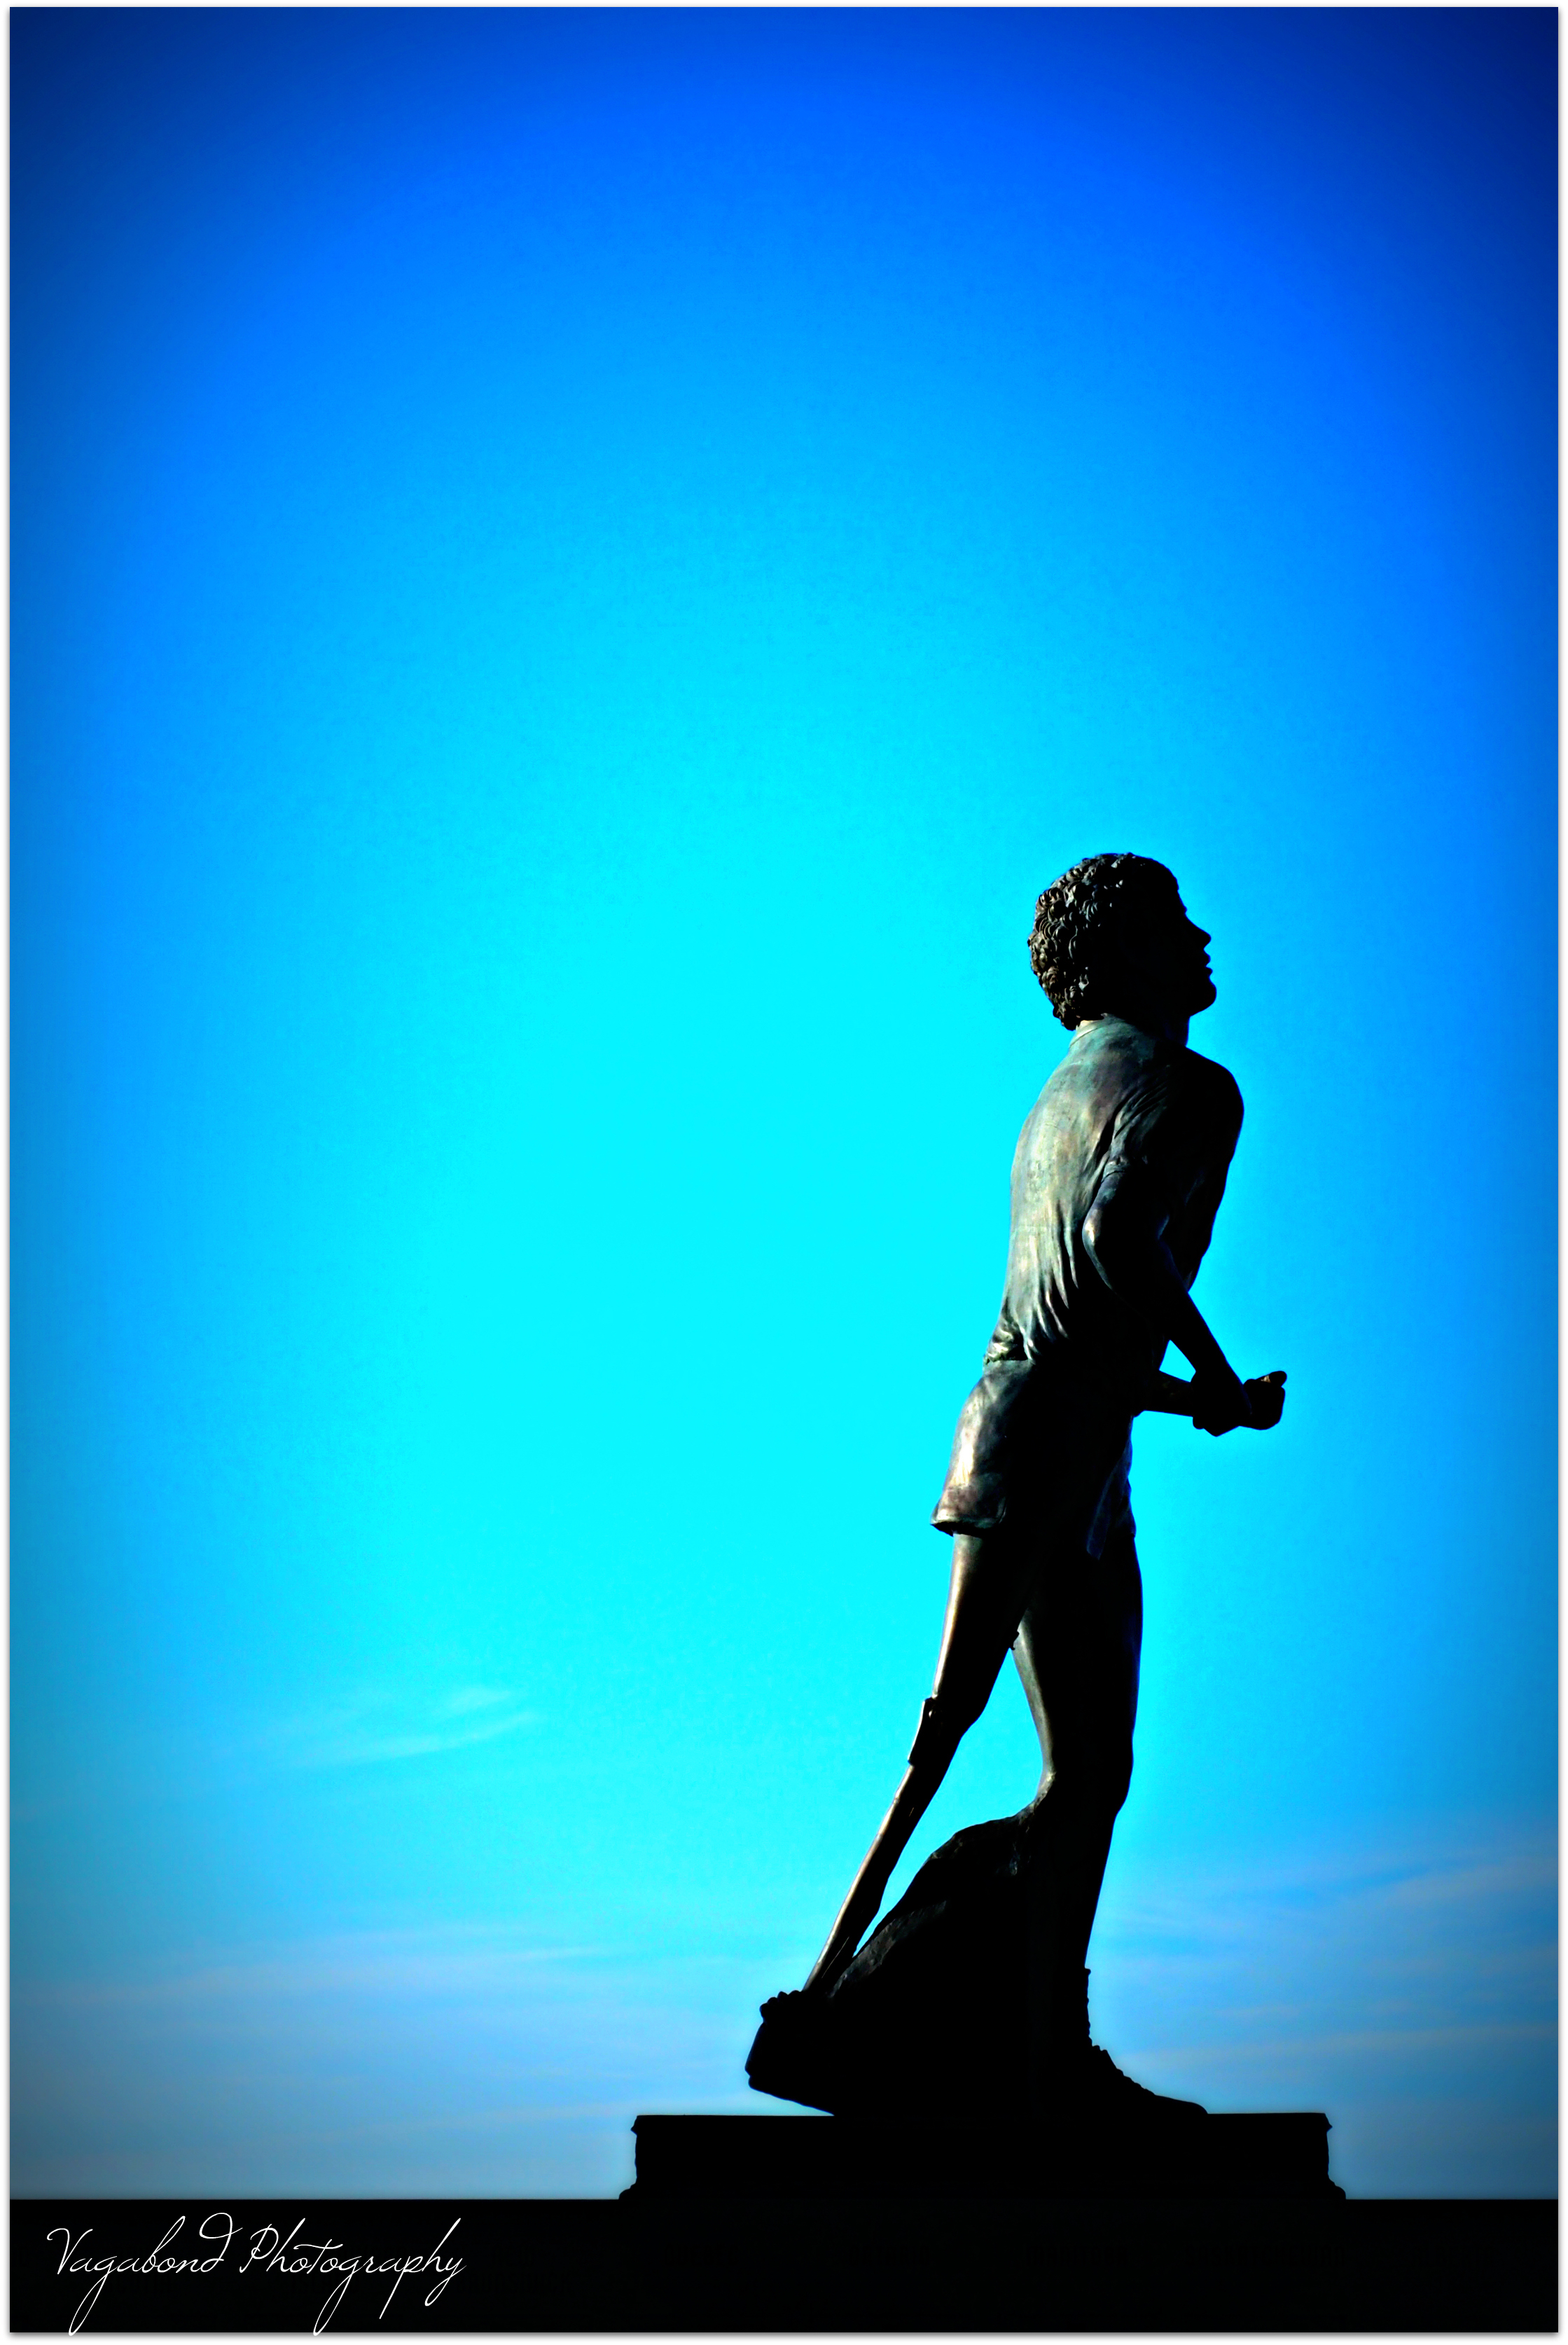 “Anything’s Possible if You Try” – Terry Fox